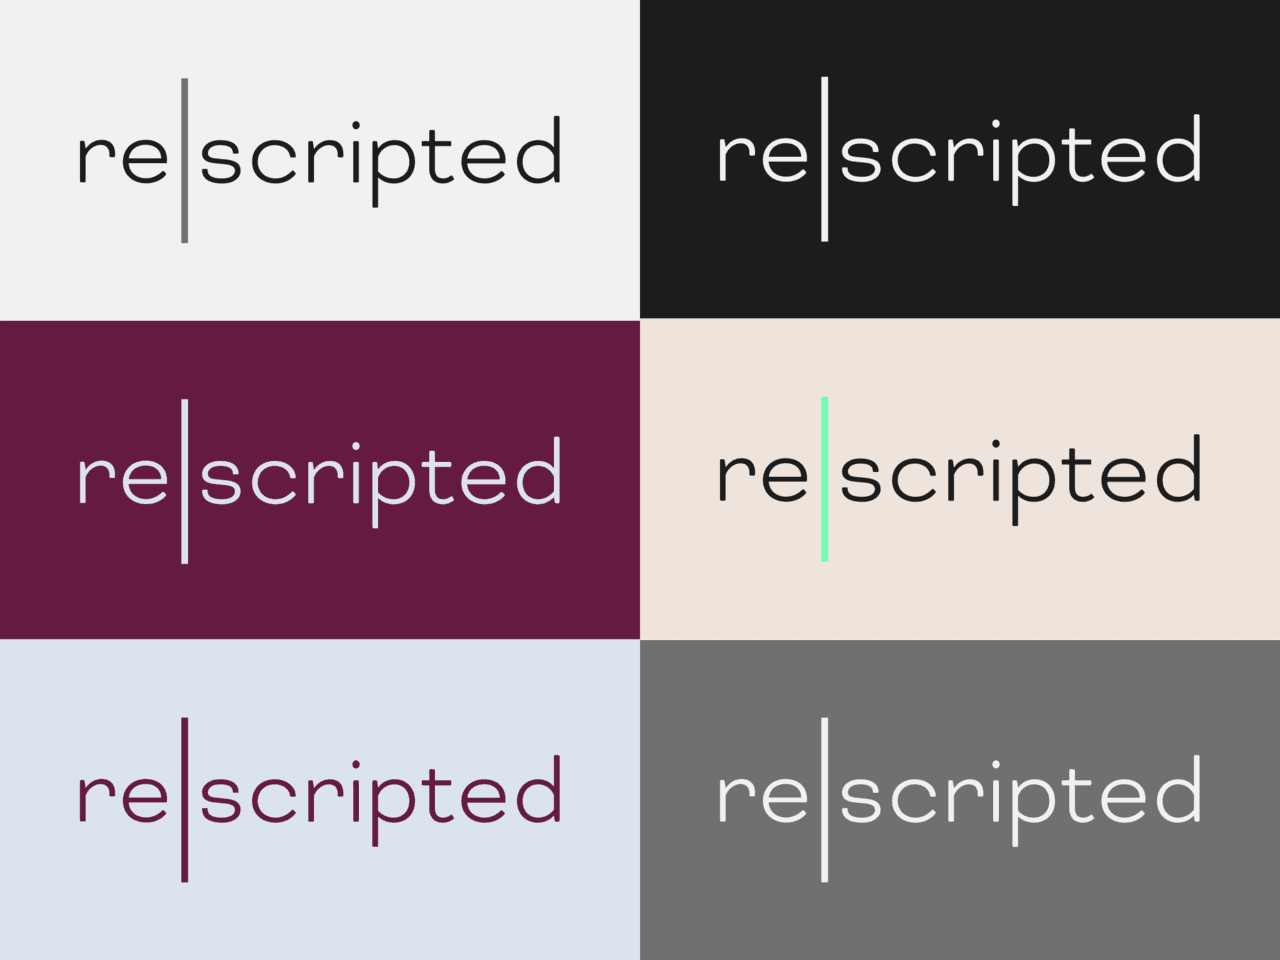 Six rectangles in re|scripted brand colours feature the text 're|scripted' inside